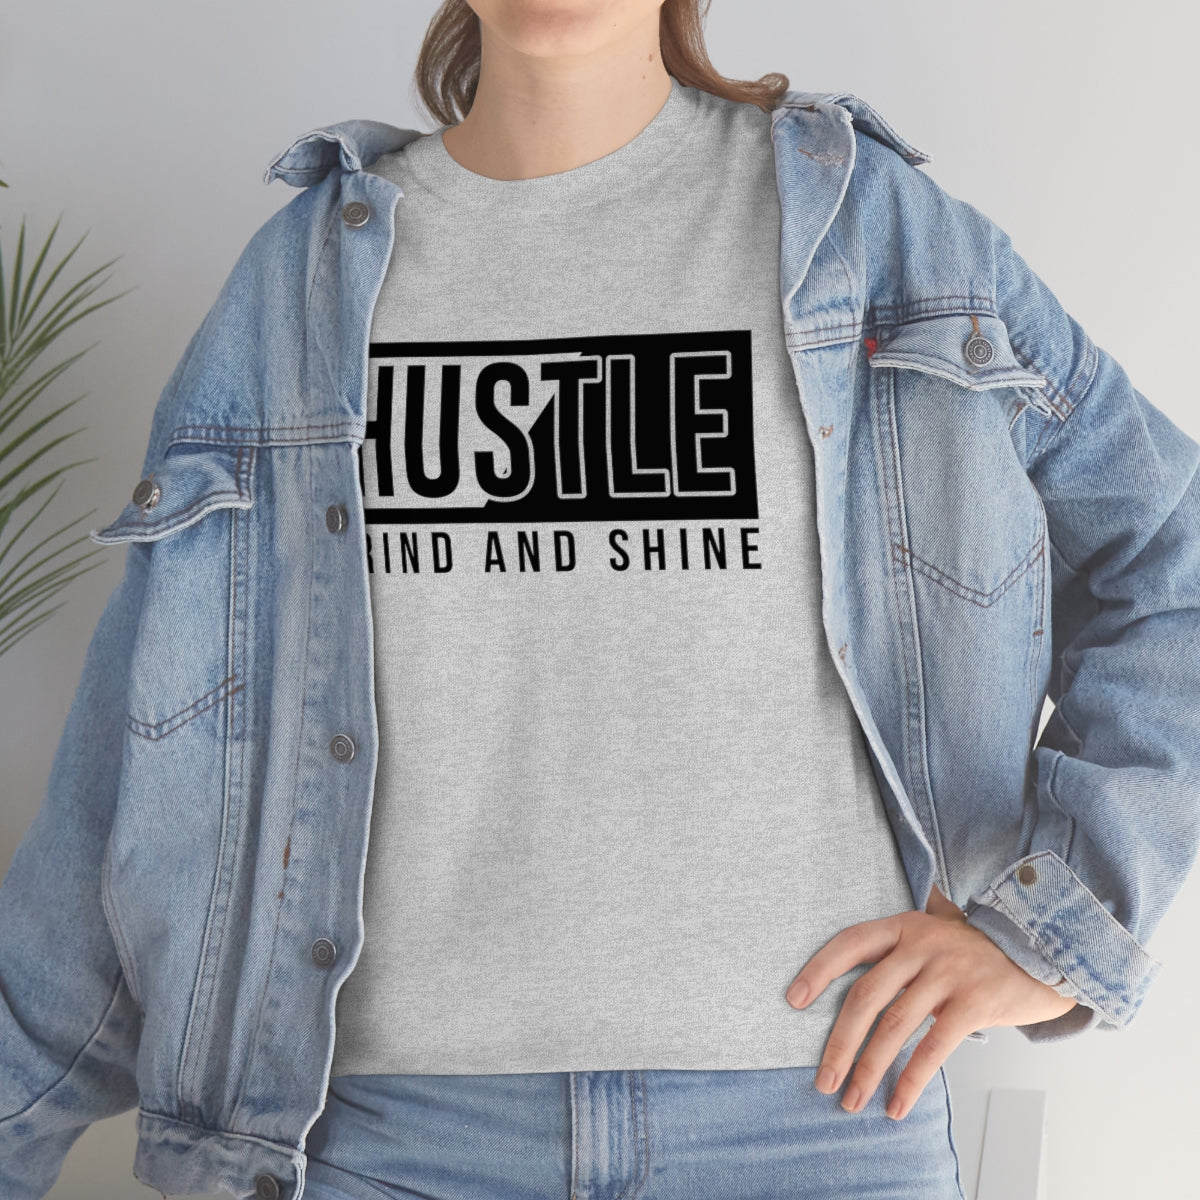 Hussle, Grind and Shine Unisex Heavy Cotton Tee